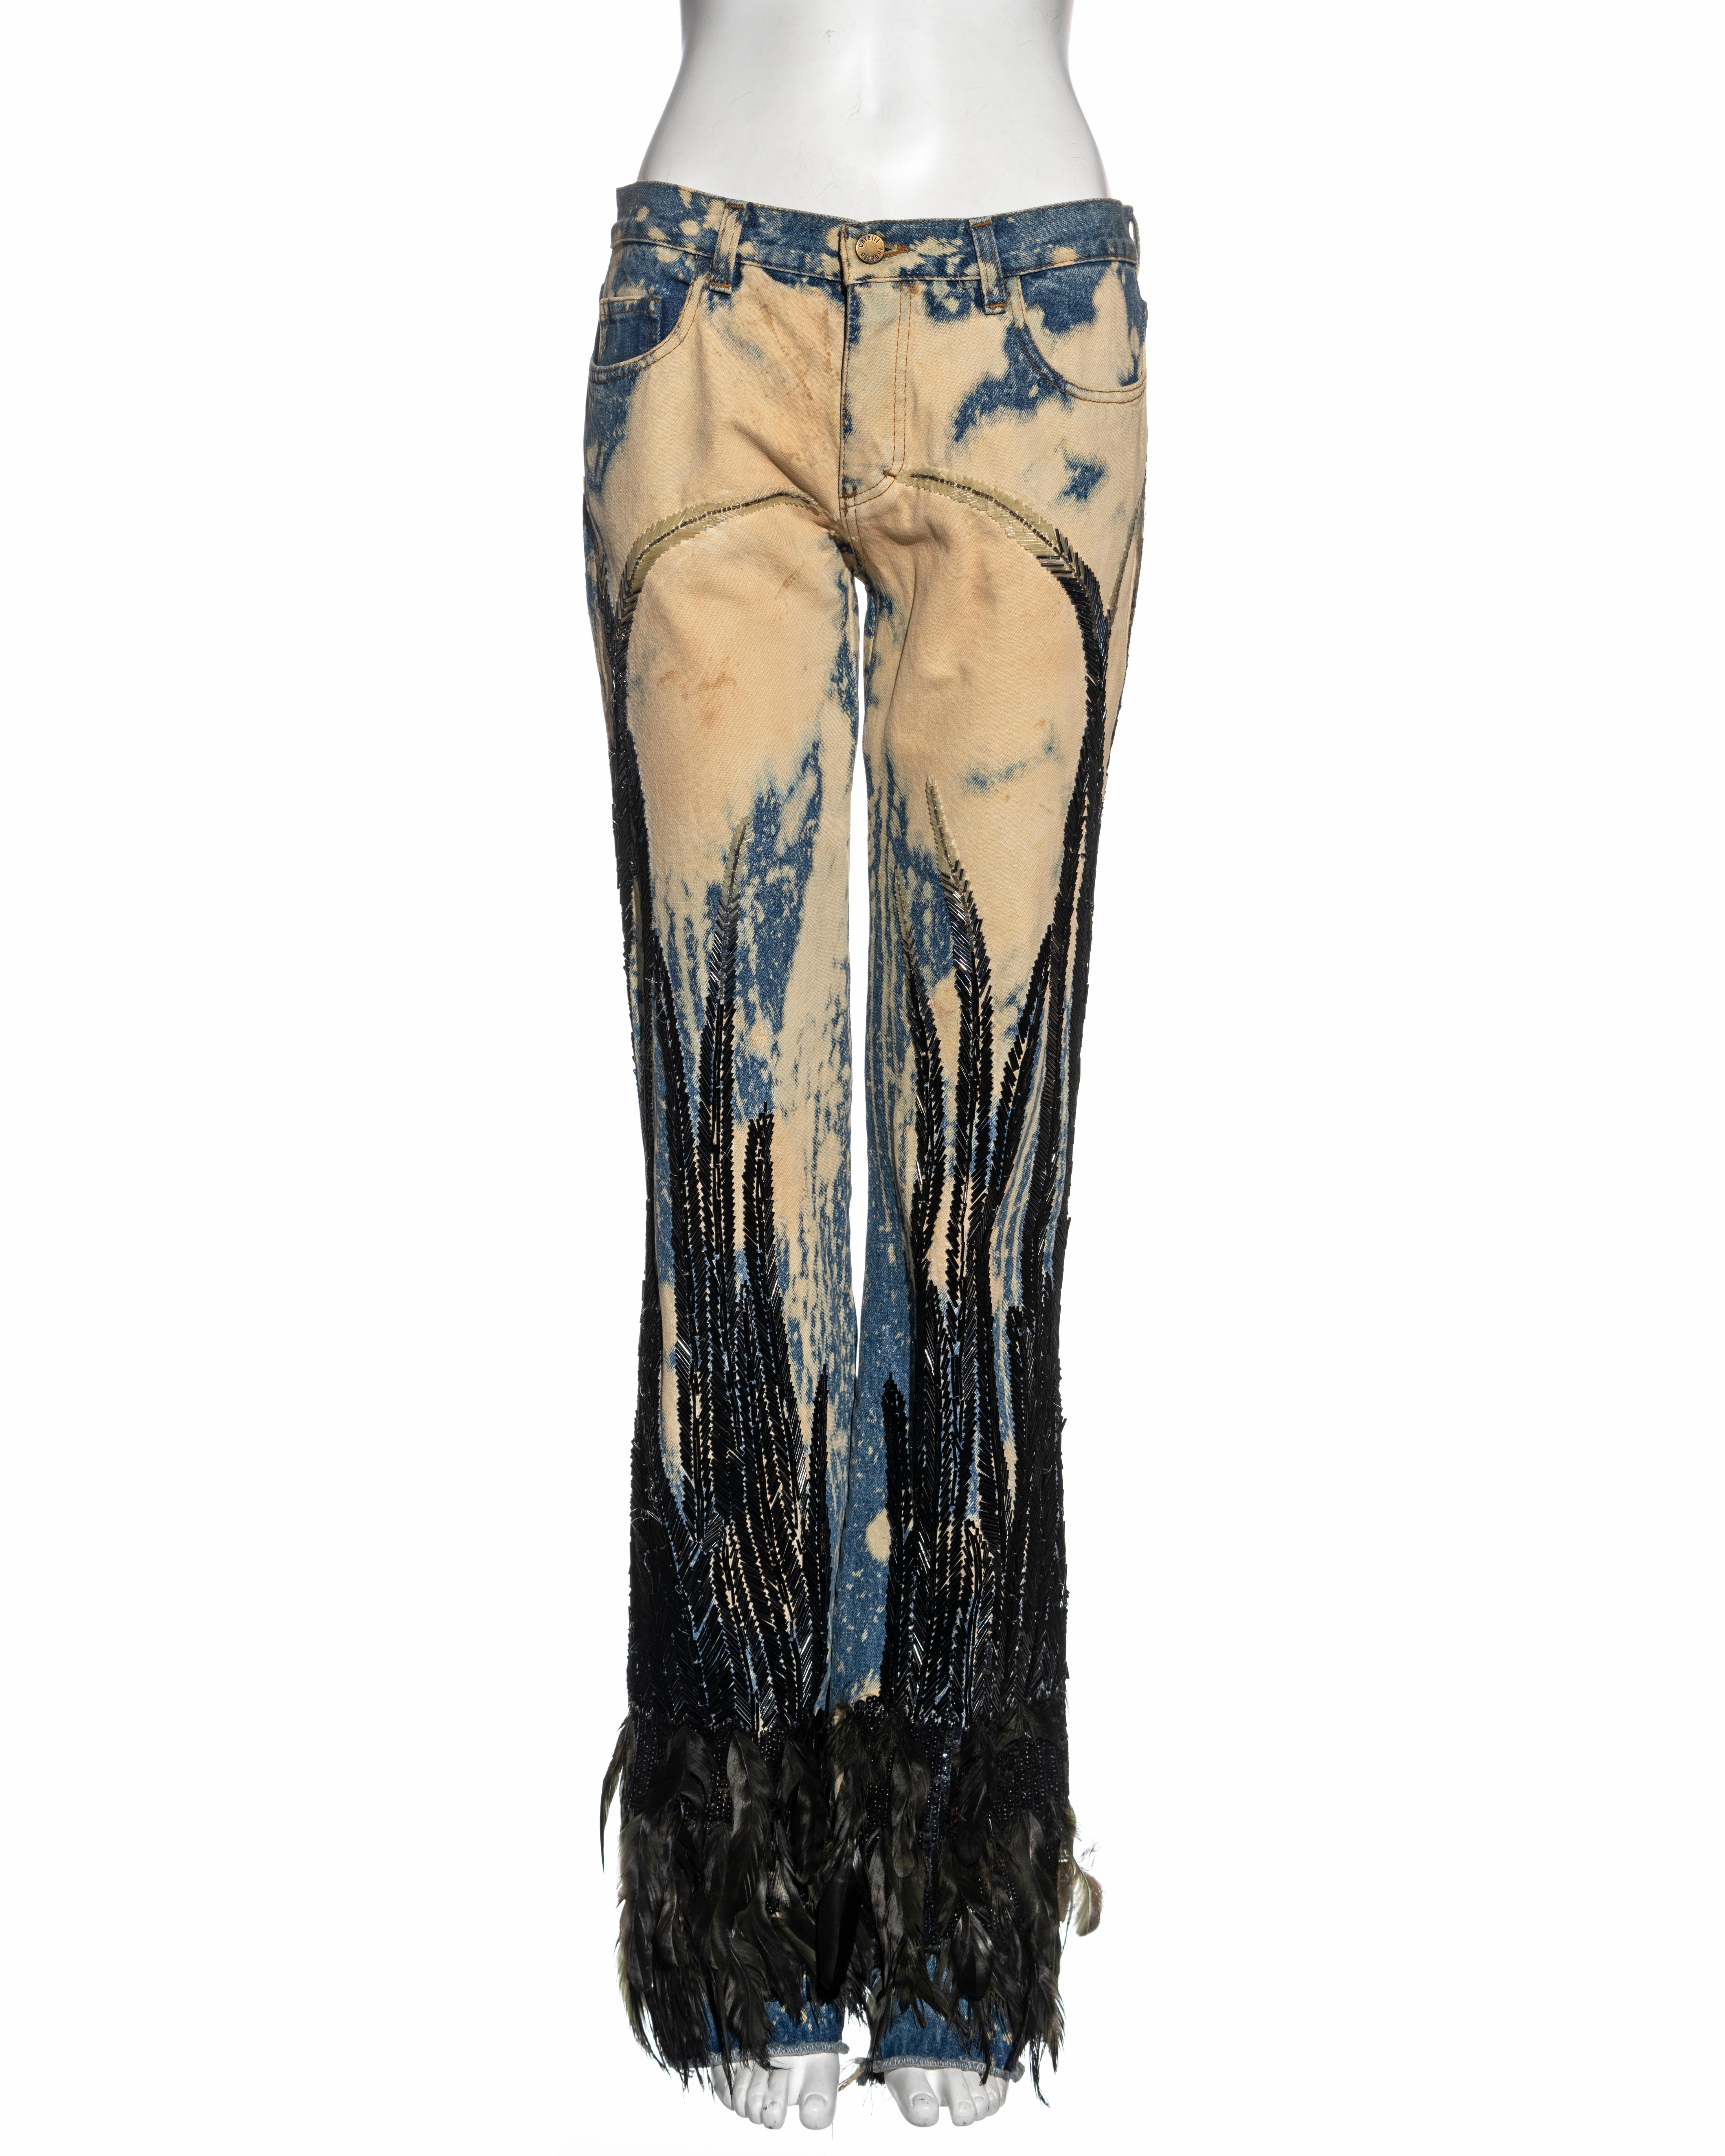 Women's Roberto Cavalli bleached denim beaded jeans with feather embellishments, fw 2001